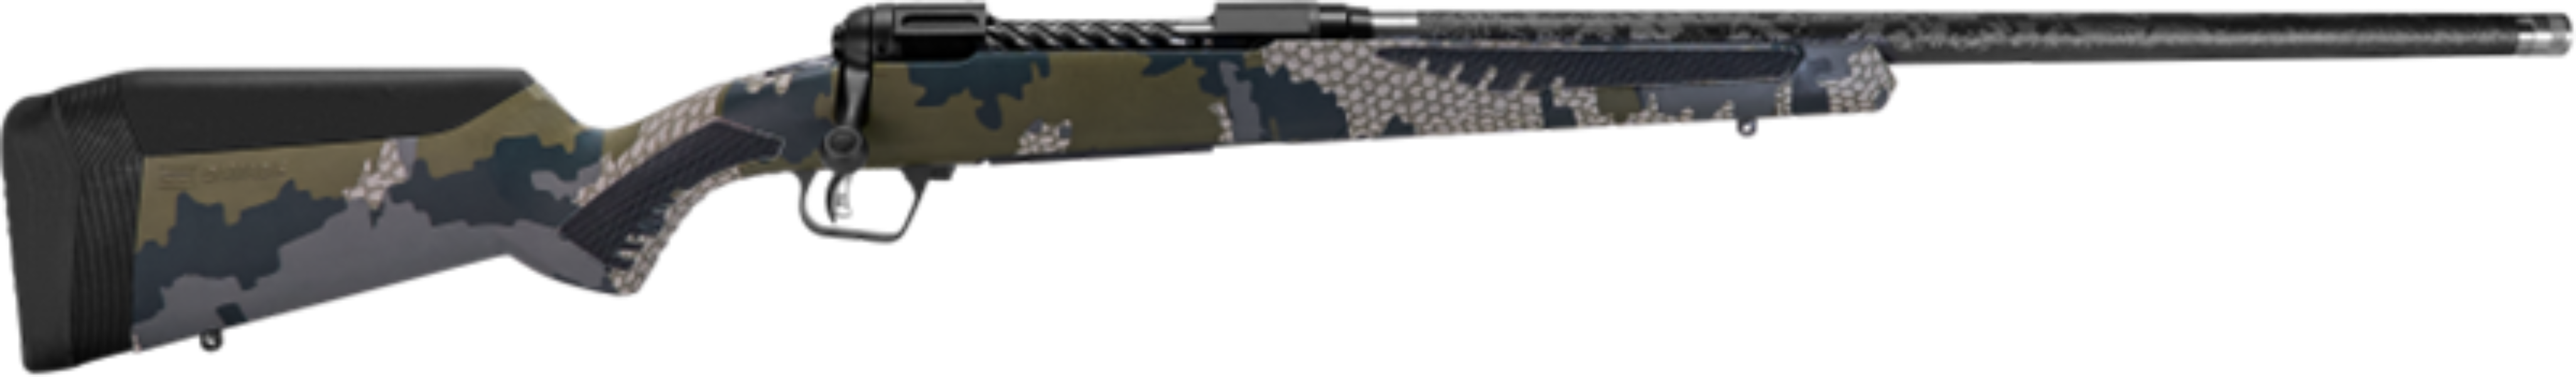 Savage arms 110 ultralite camo repetierbuechse1